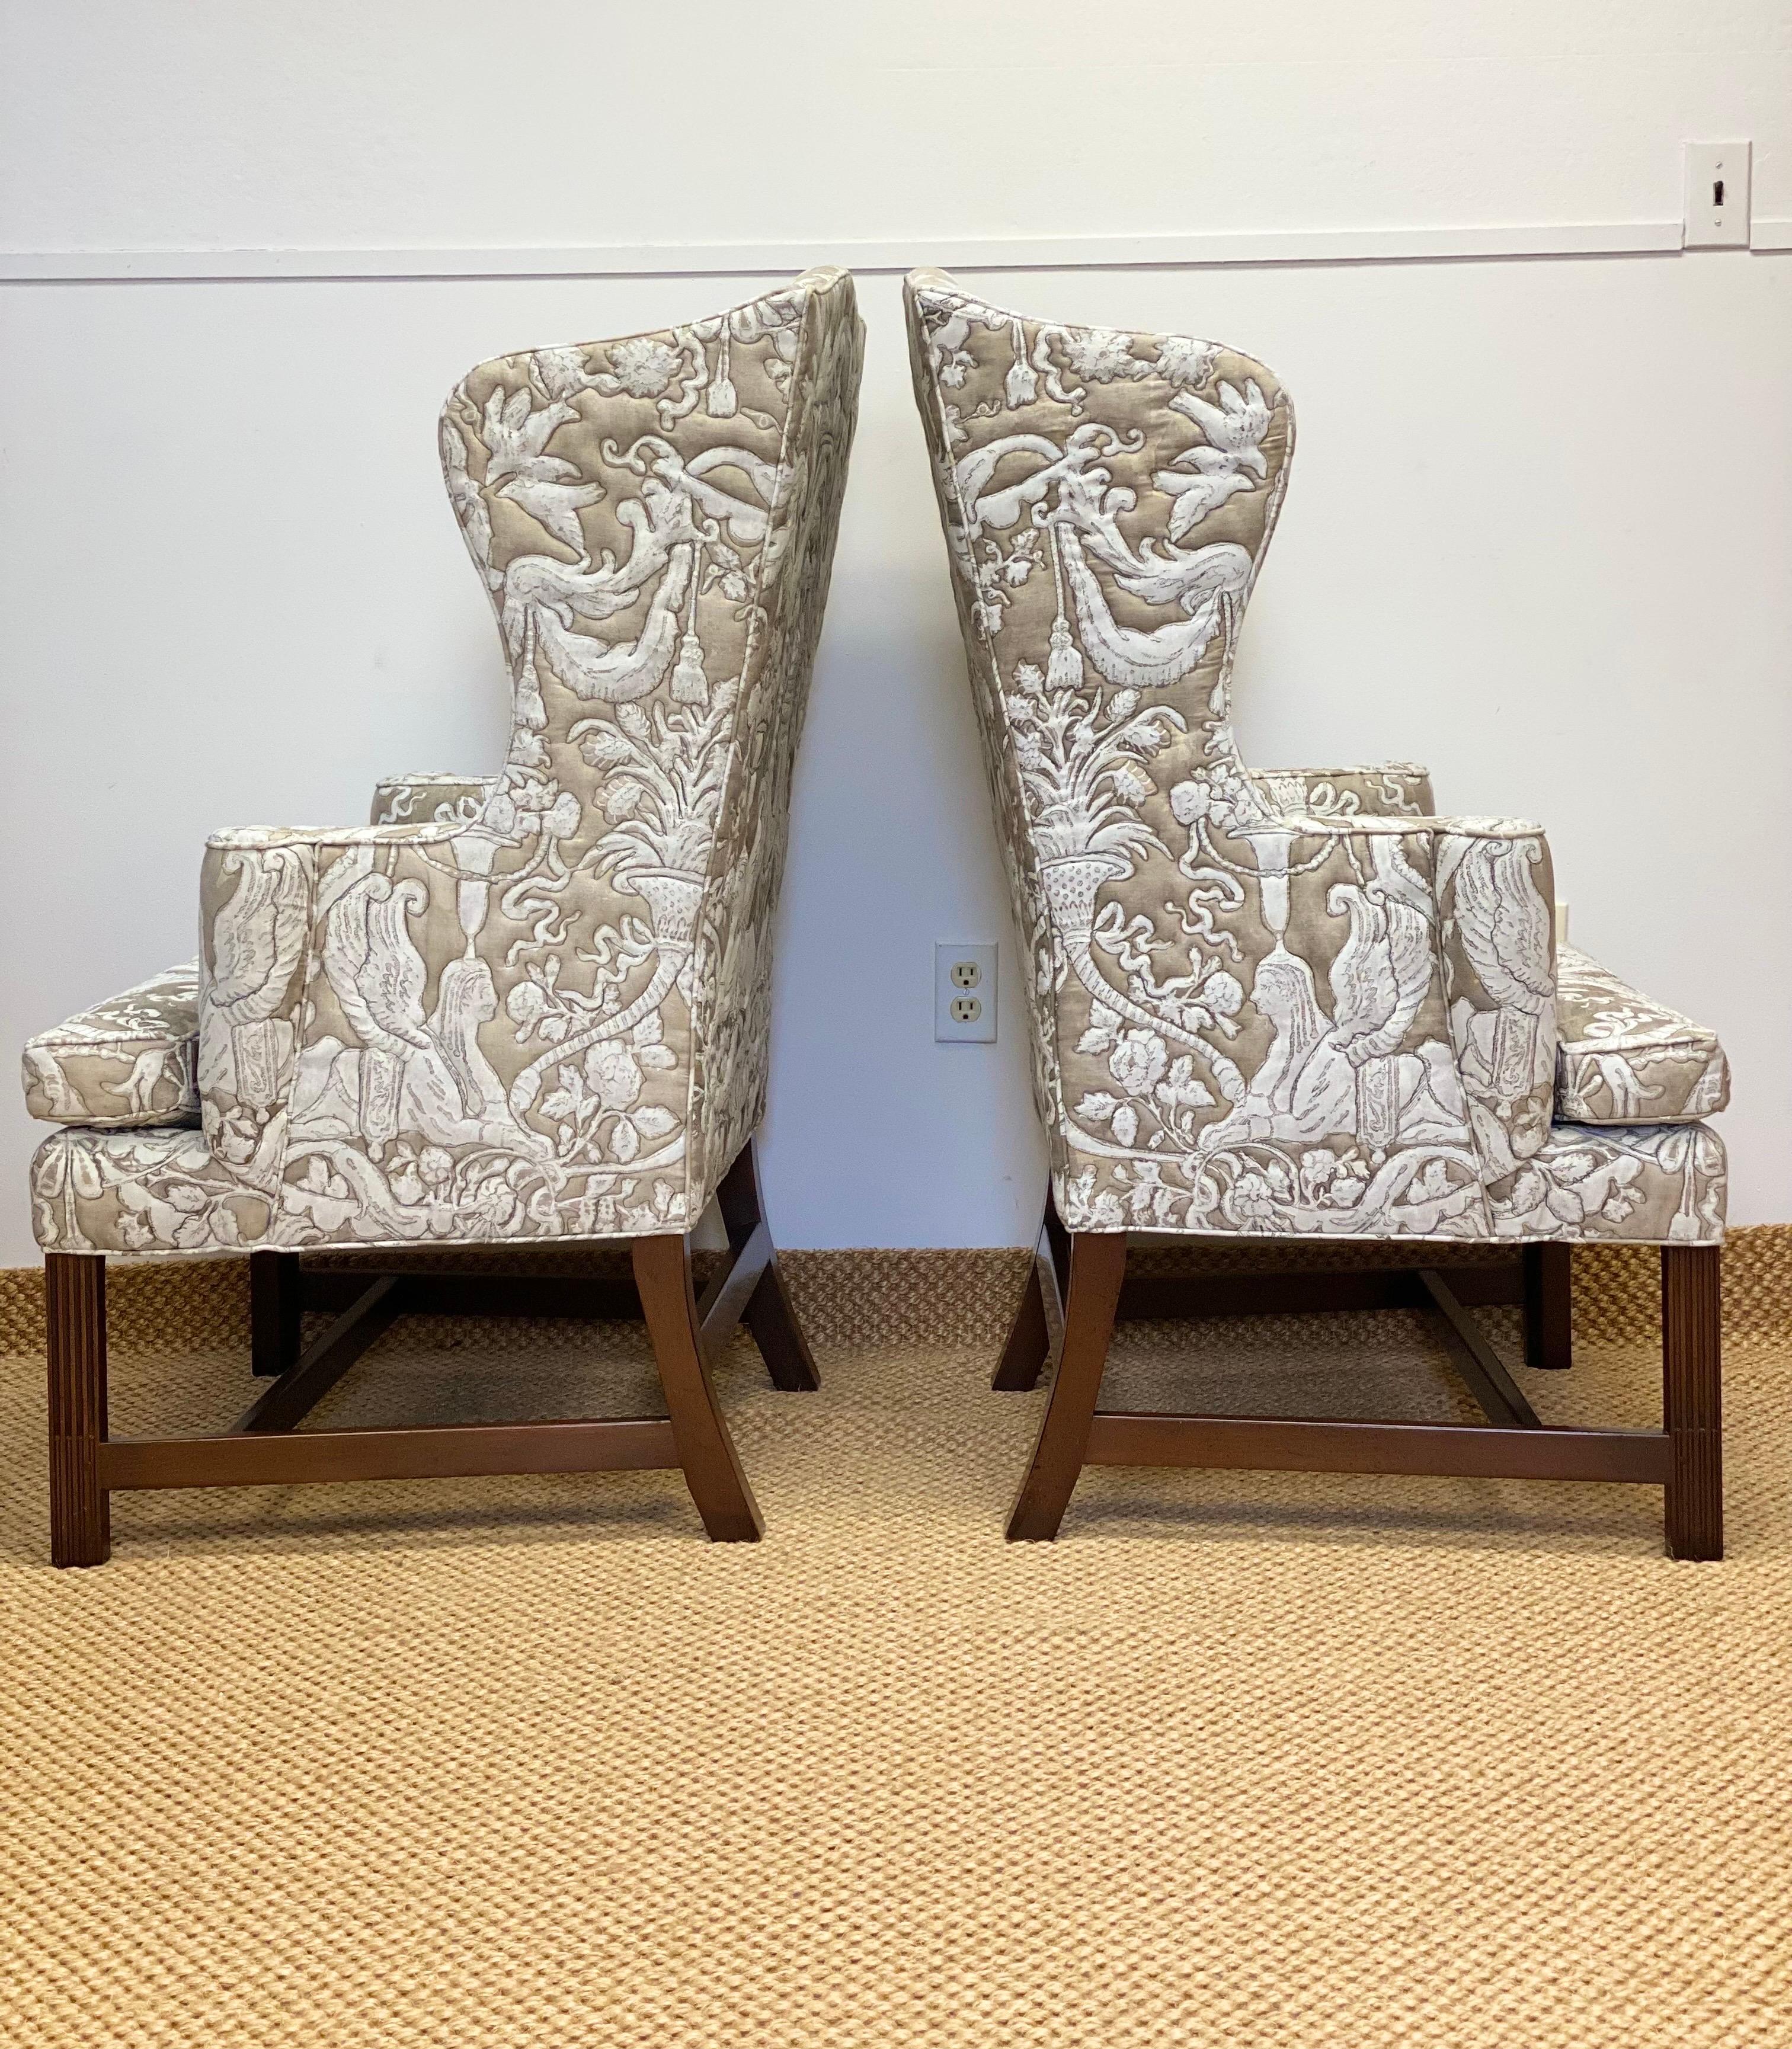 Américain Kittinger Coloni Colonial Williamsburg Neoclassical Wingback Chairs 1960s - a Pair en vente